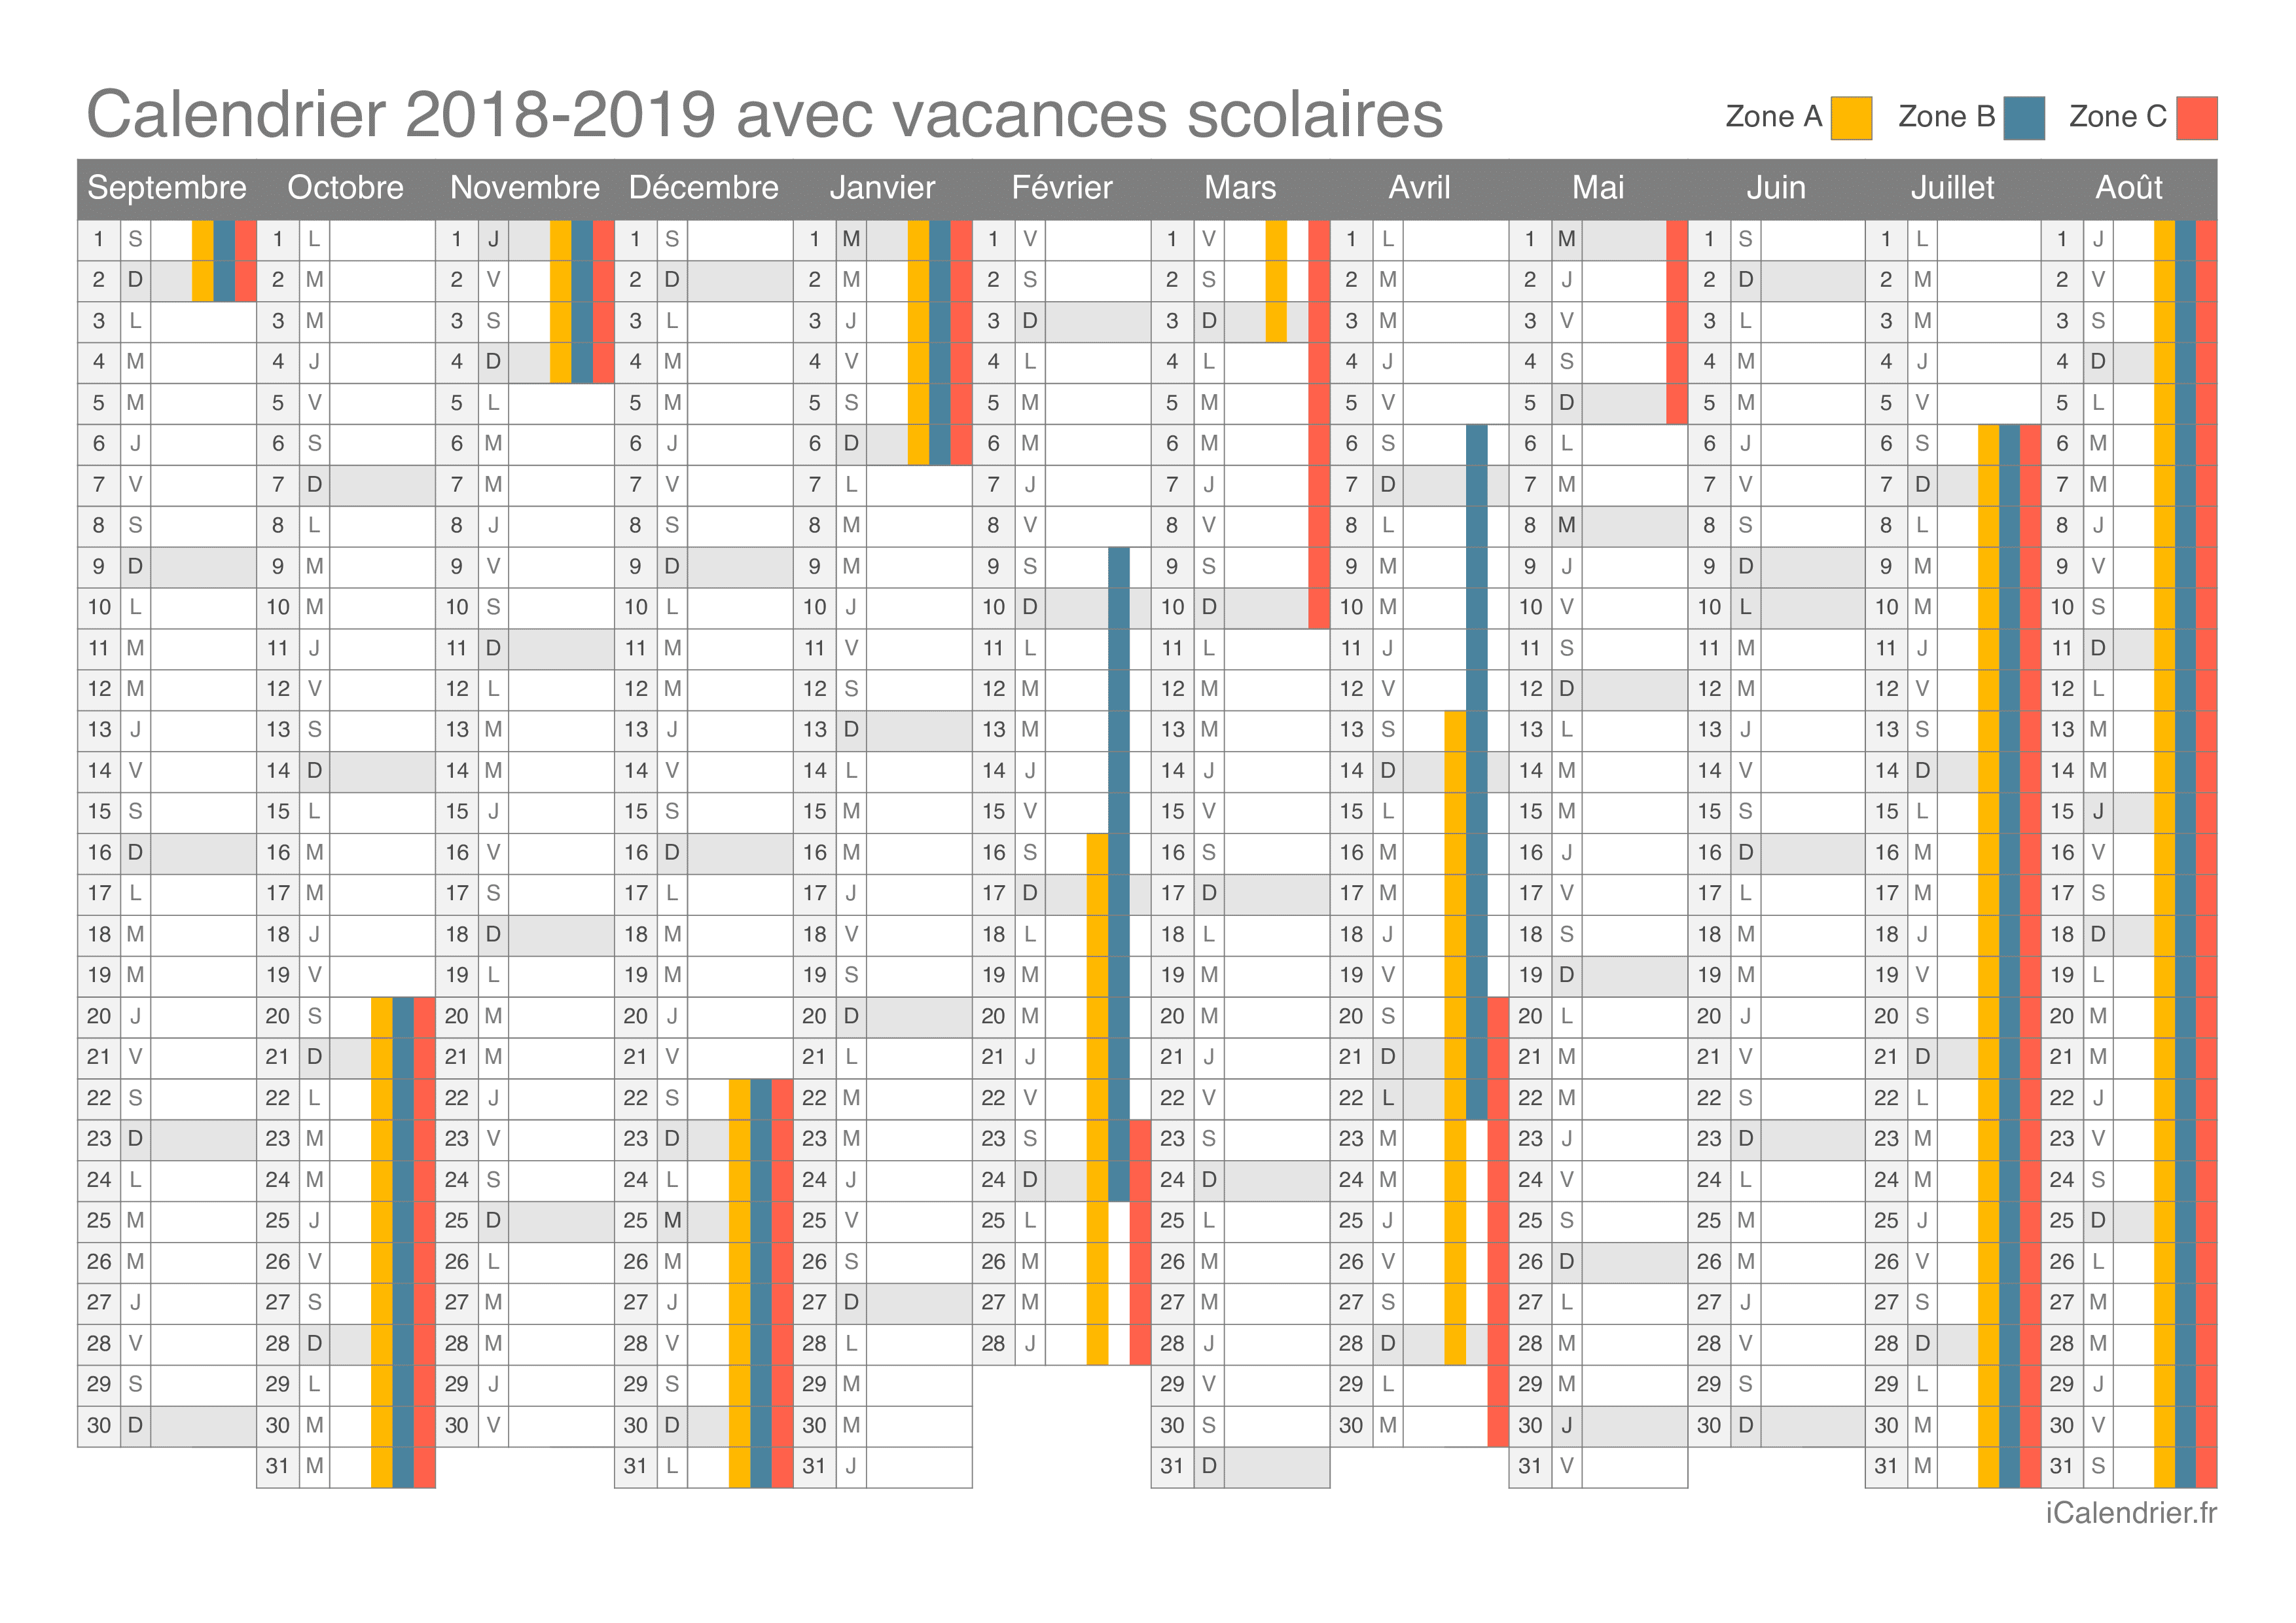 http://icalendrier.fr/media/vacances/2018-2019/calendrier-vacances-2018-2019.png